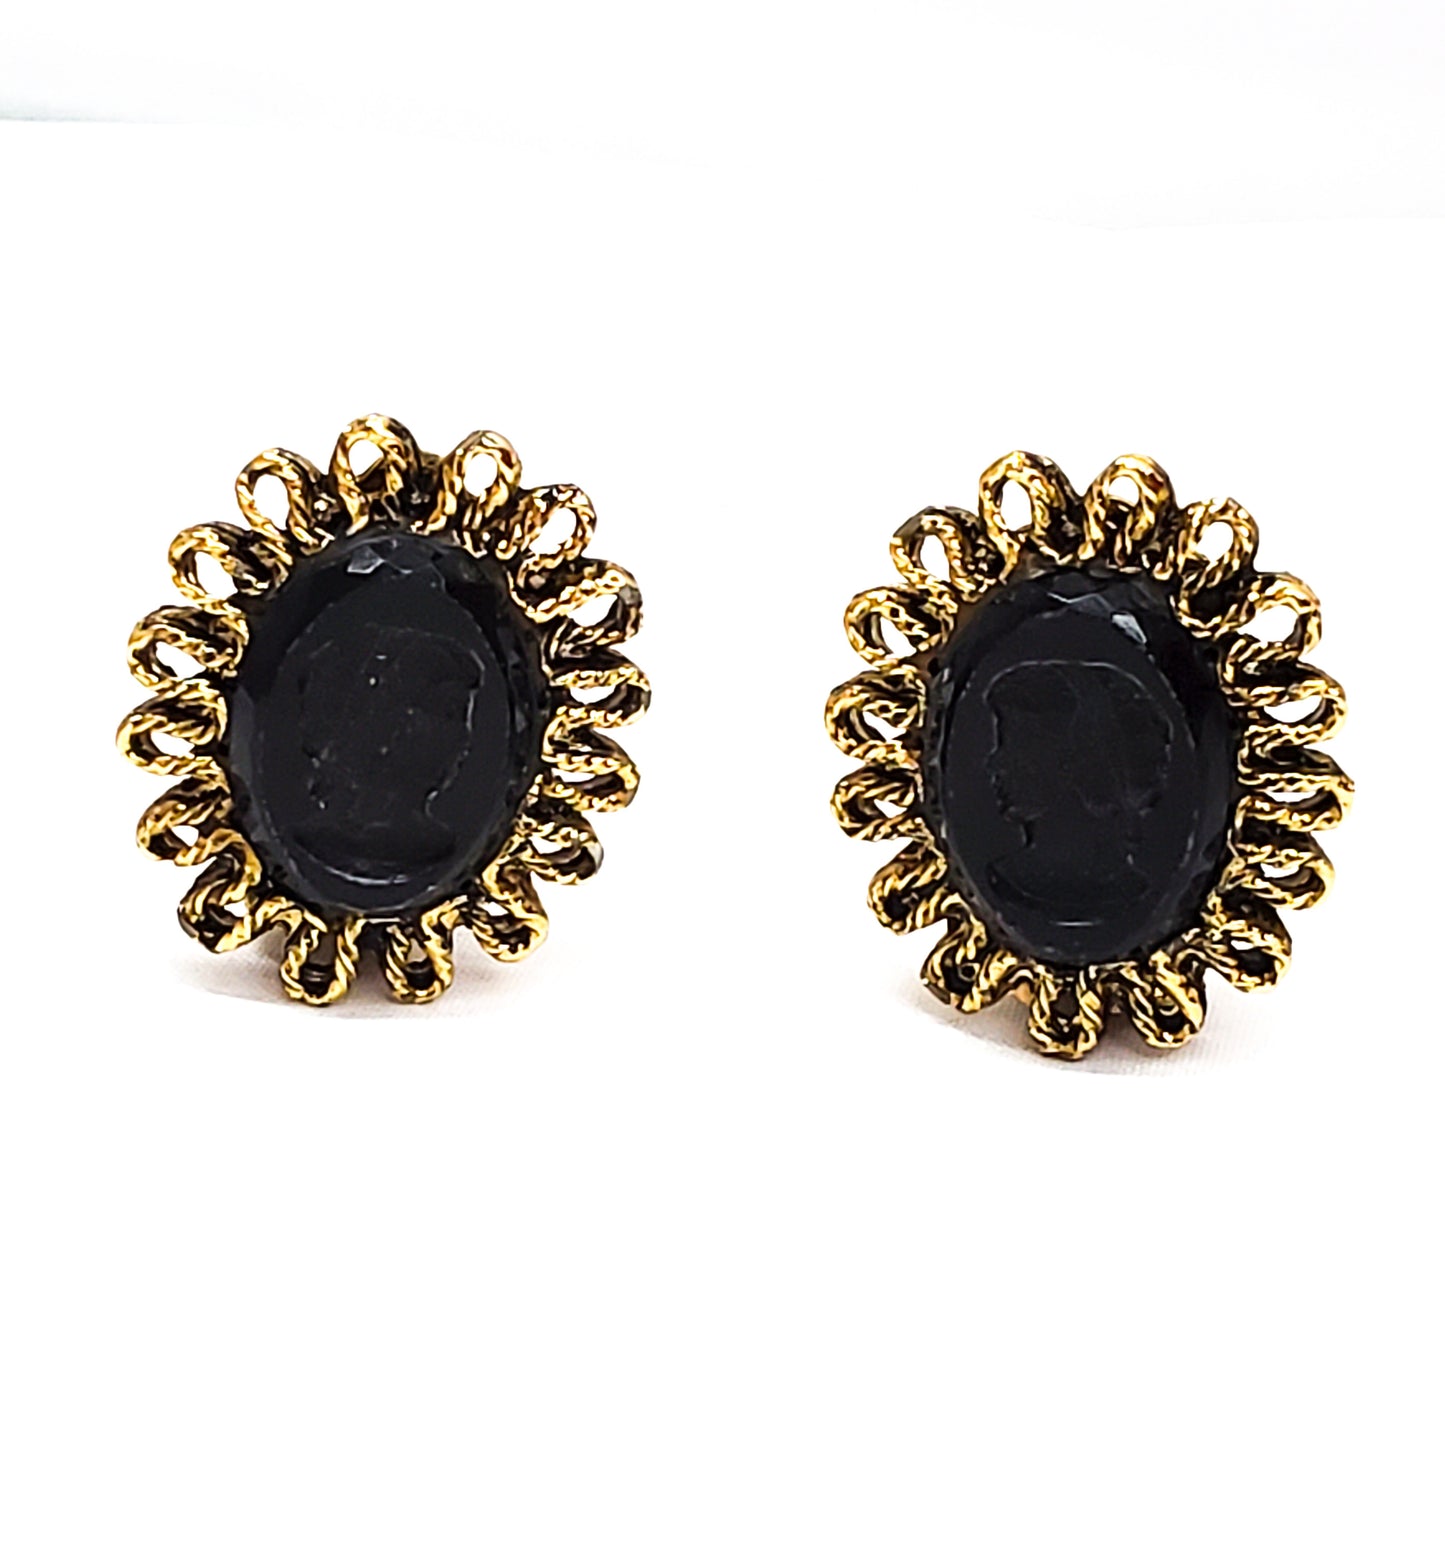 Black Glass reversed carved cameo clip on vintage earrings mid century